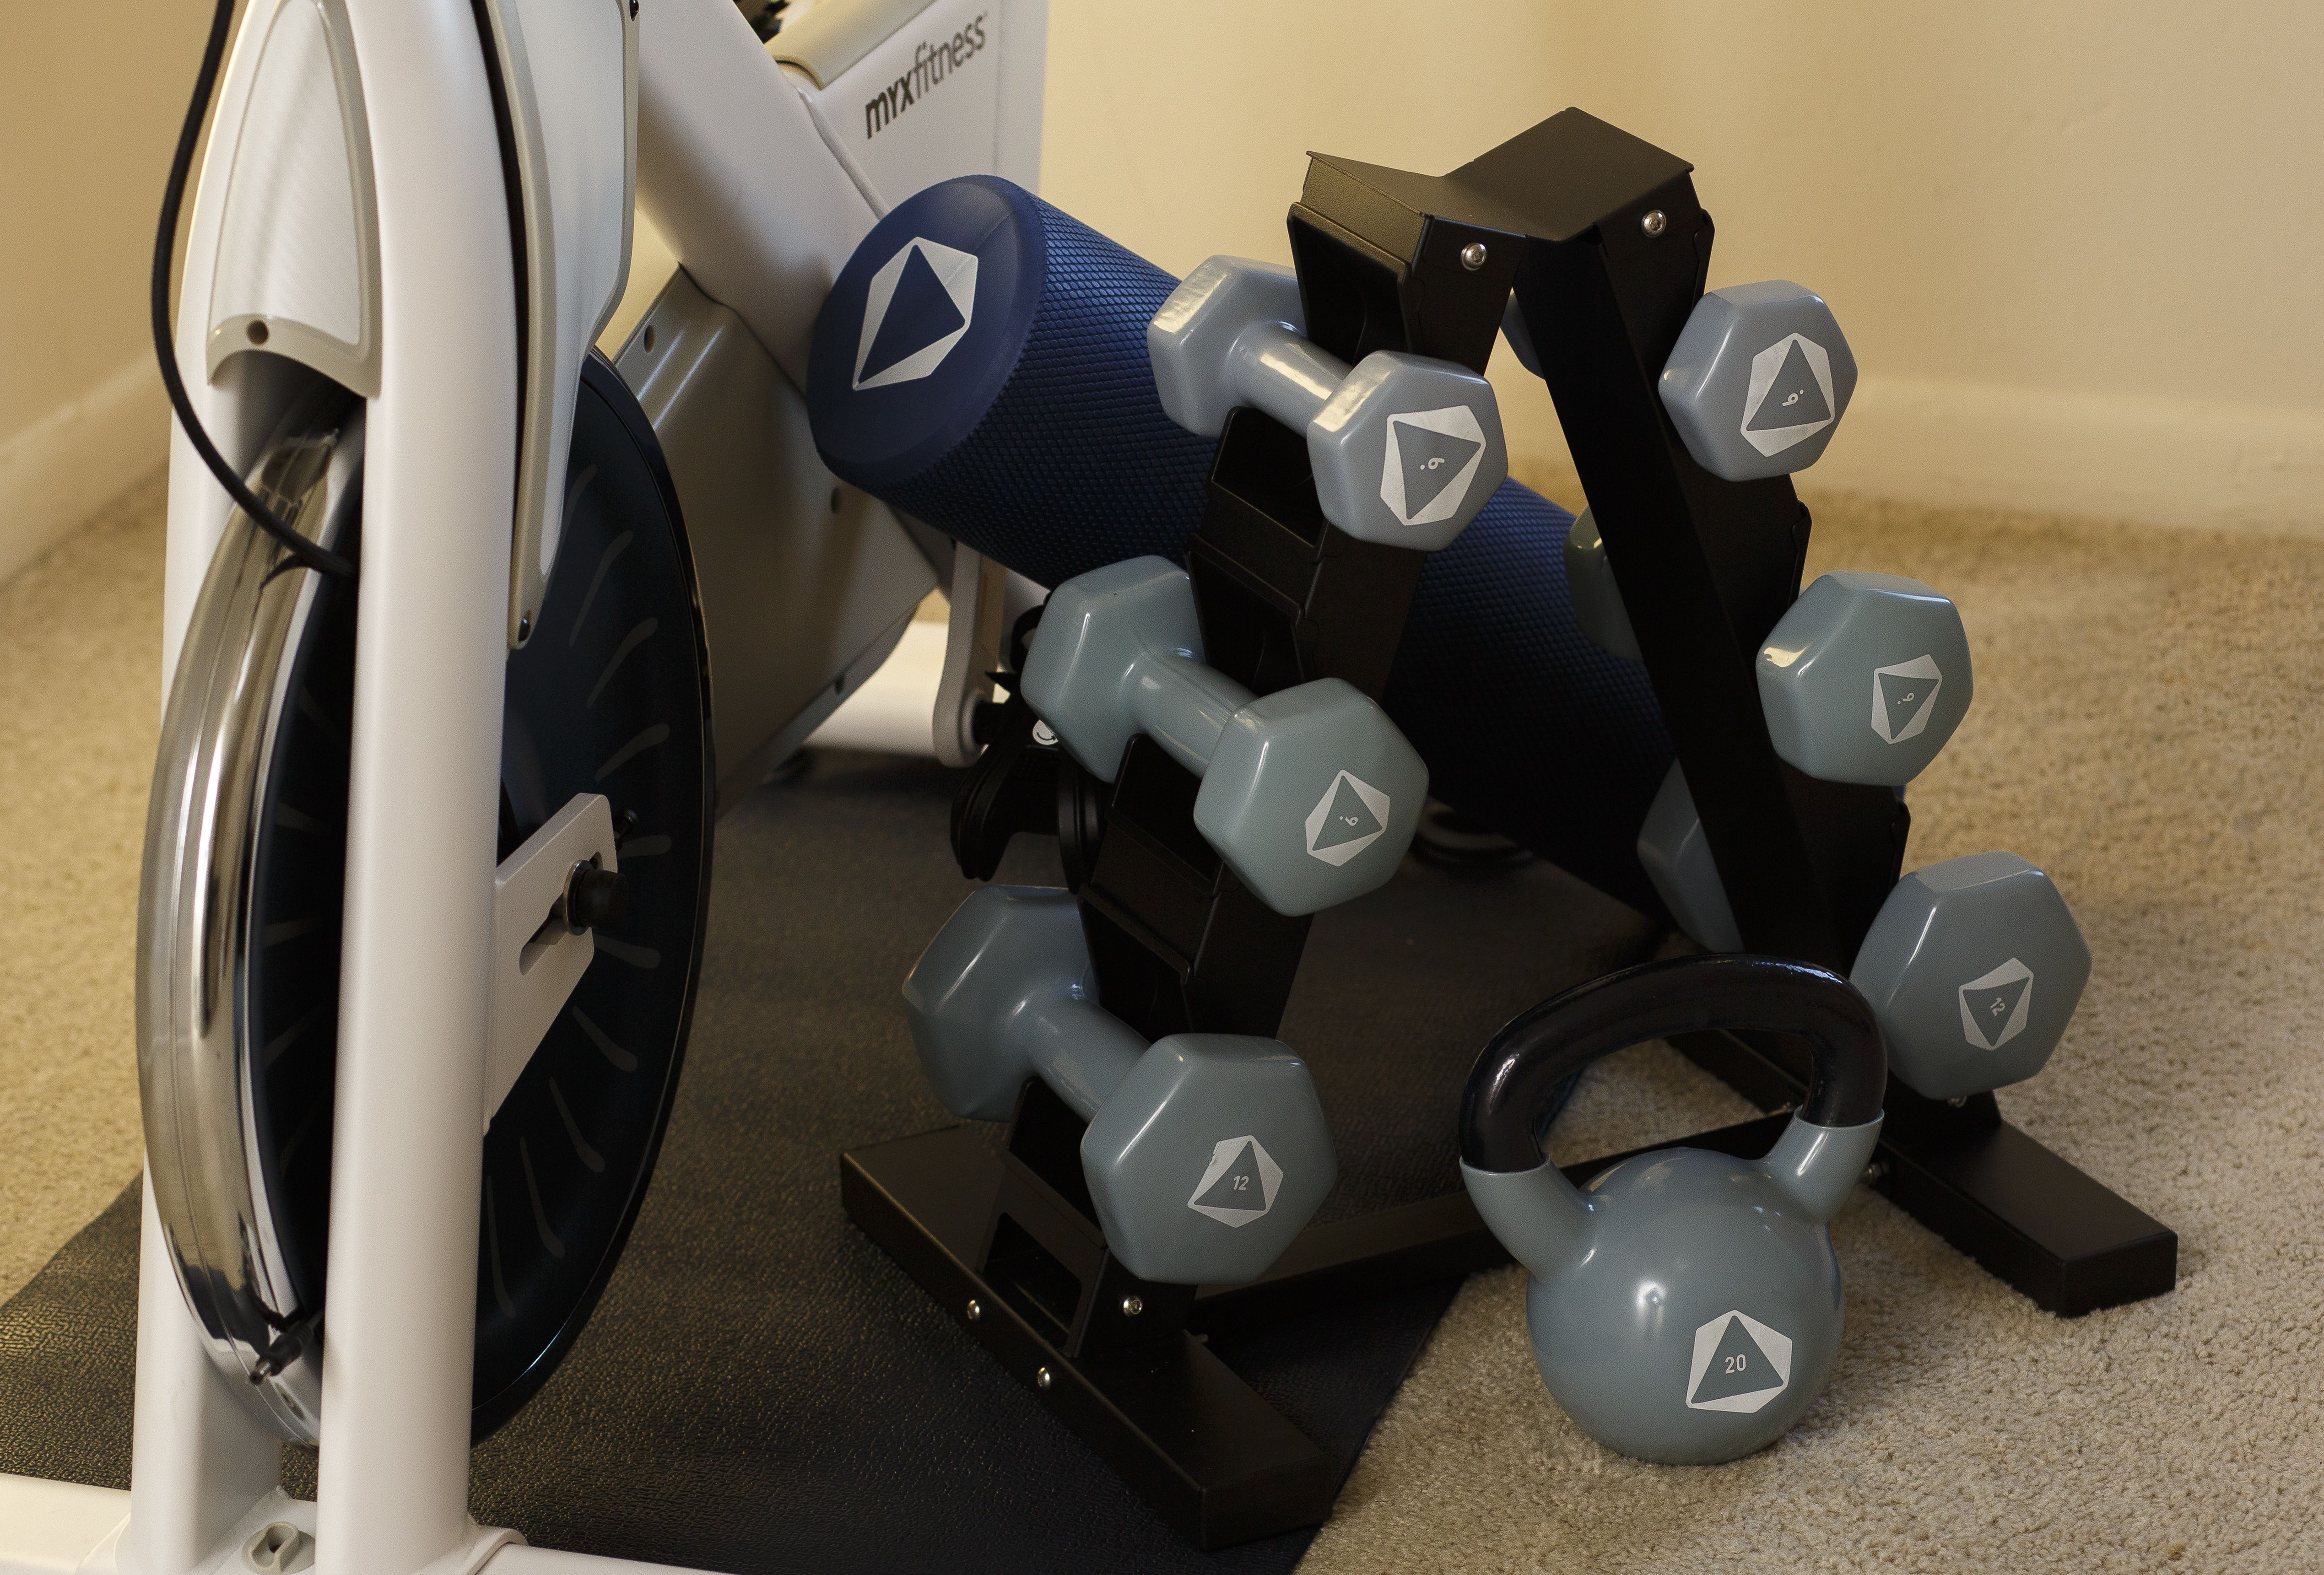 The included set of dumbbells.